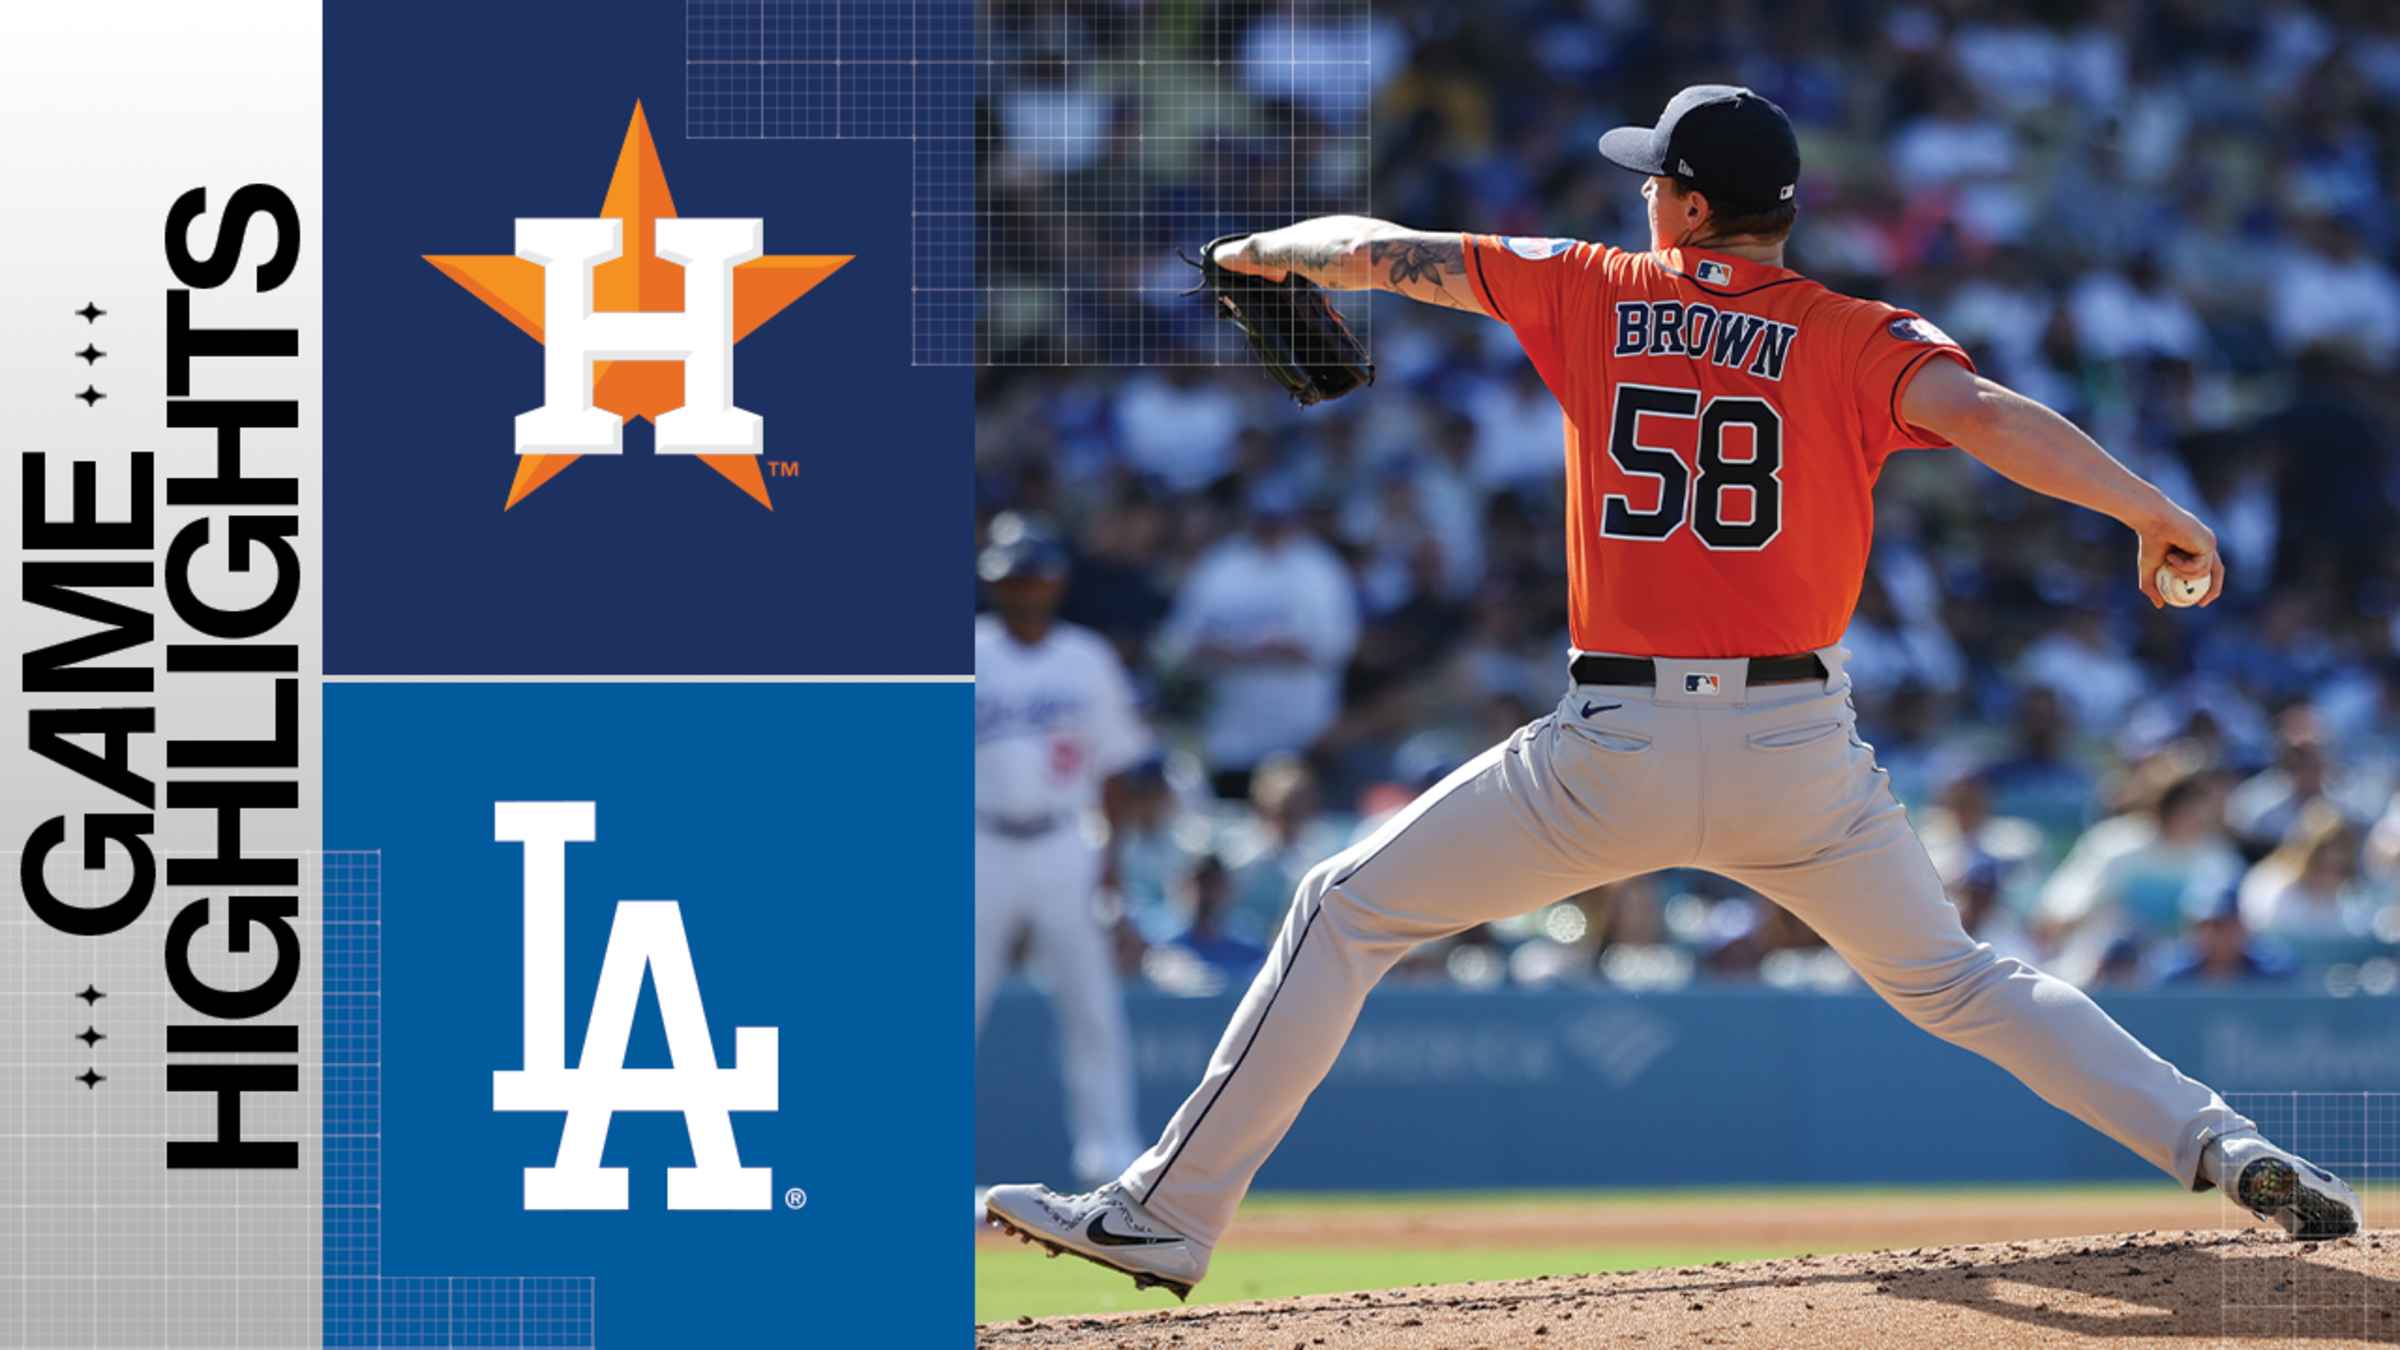 Bregman's RBI in the 11th gives the Astros a win over the Dodgers